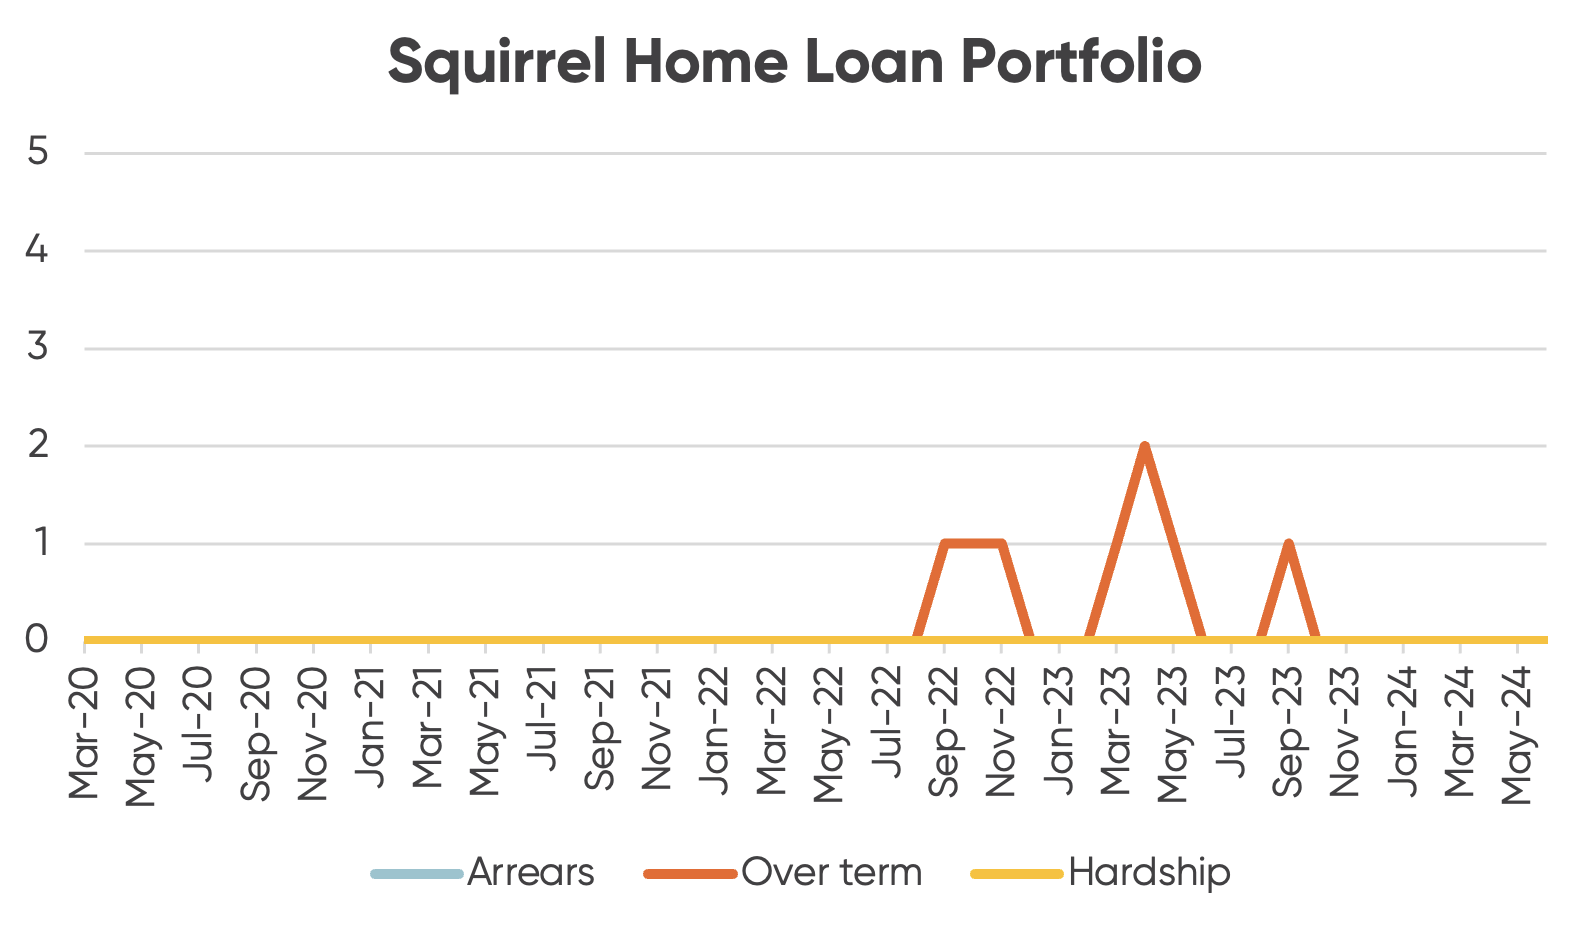 Graph showing loans in arrears, over-term or hardship in Squirrel's Home Loan Portfolio